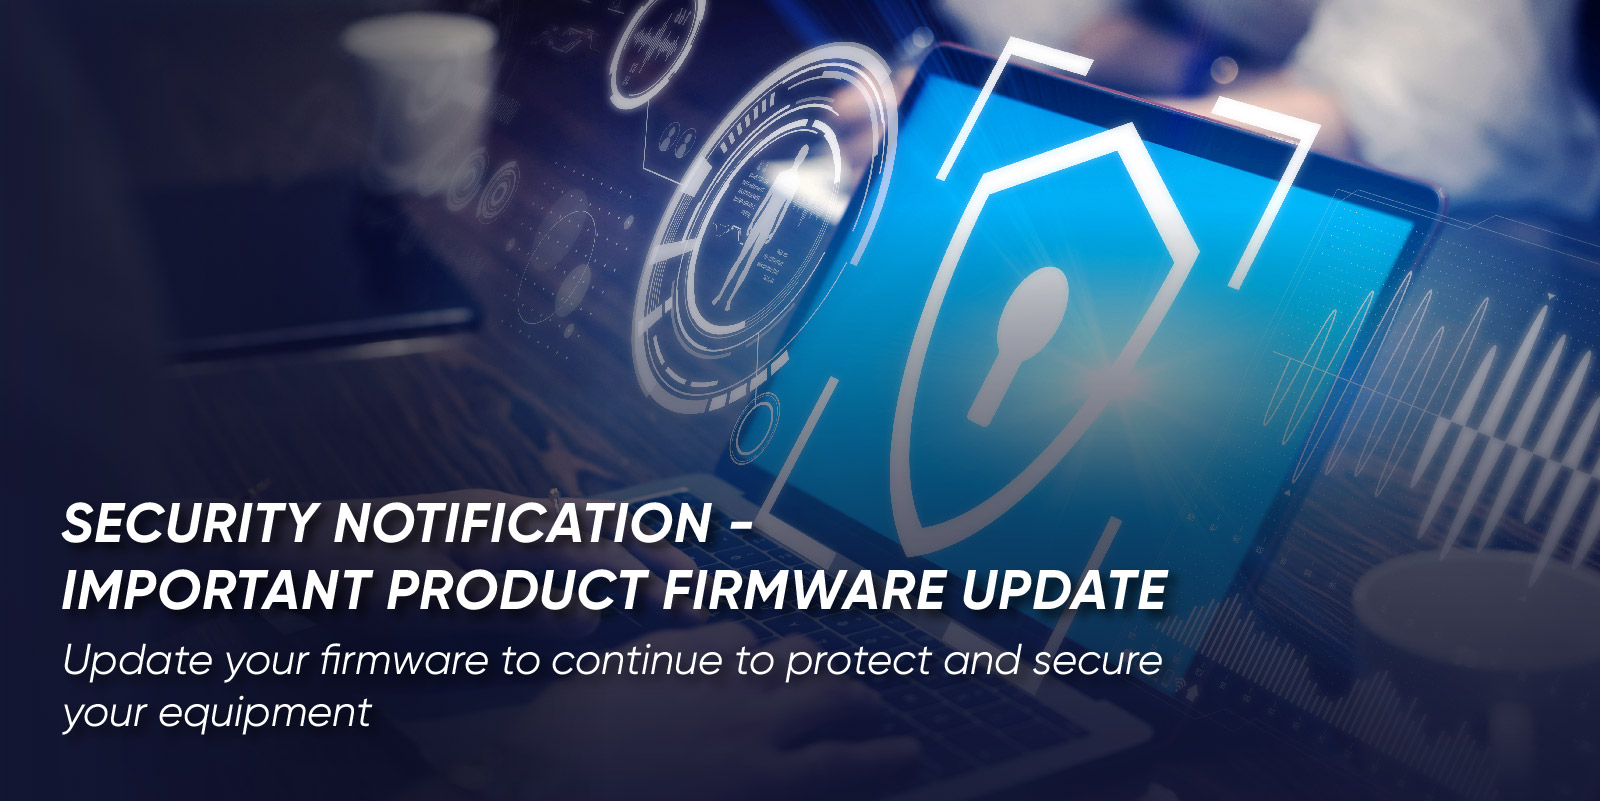 Security Notification - Important Product Firmware Update